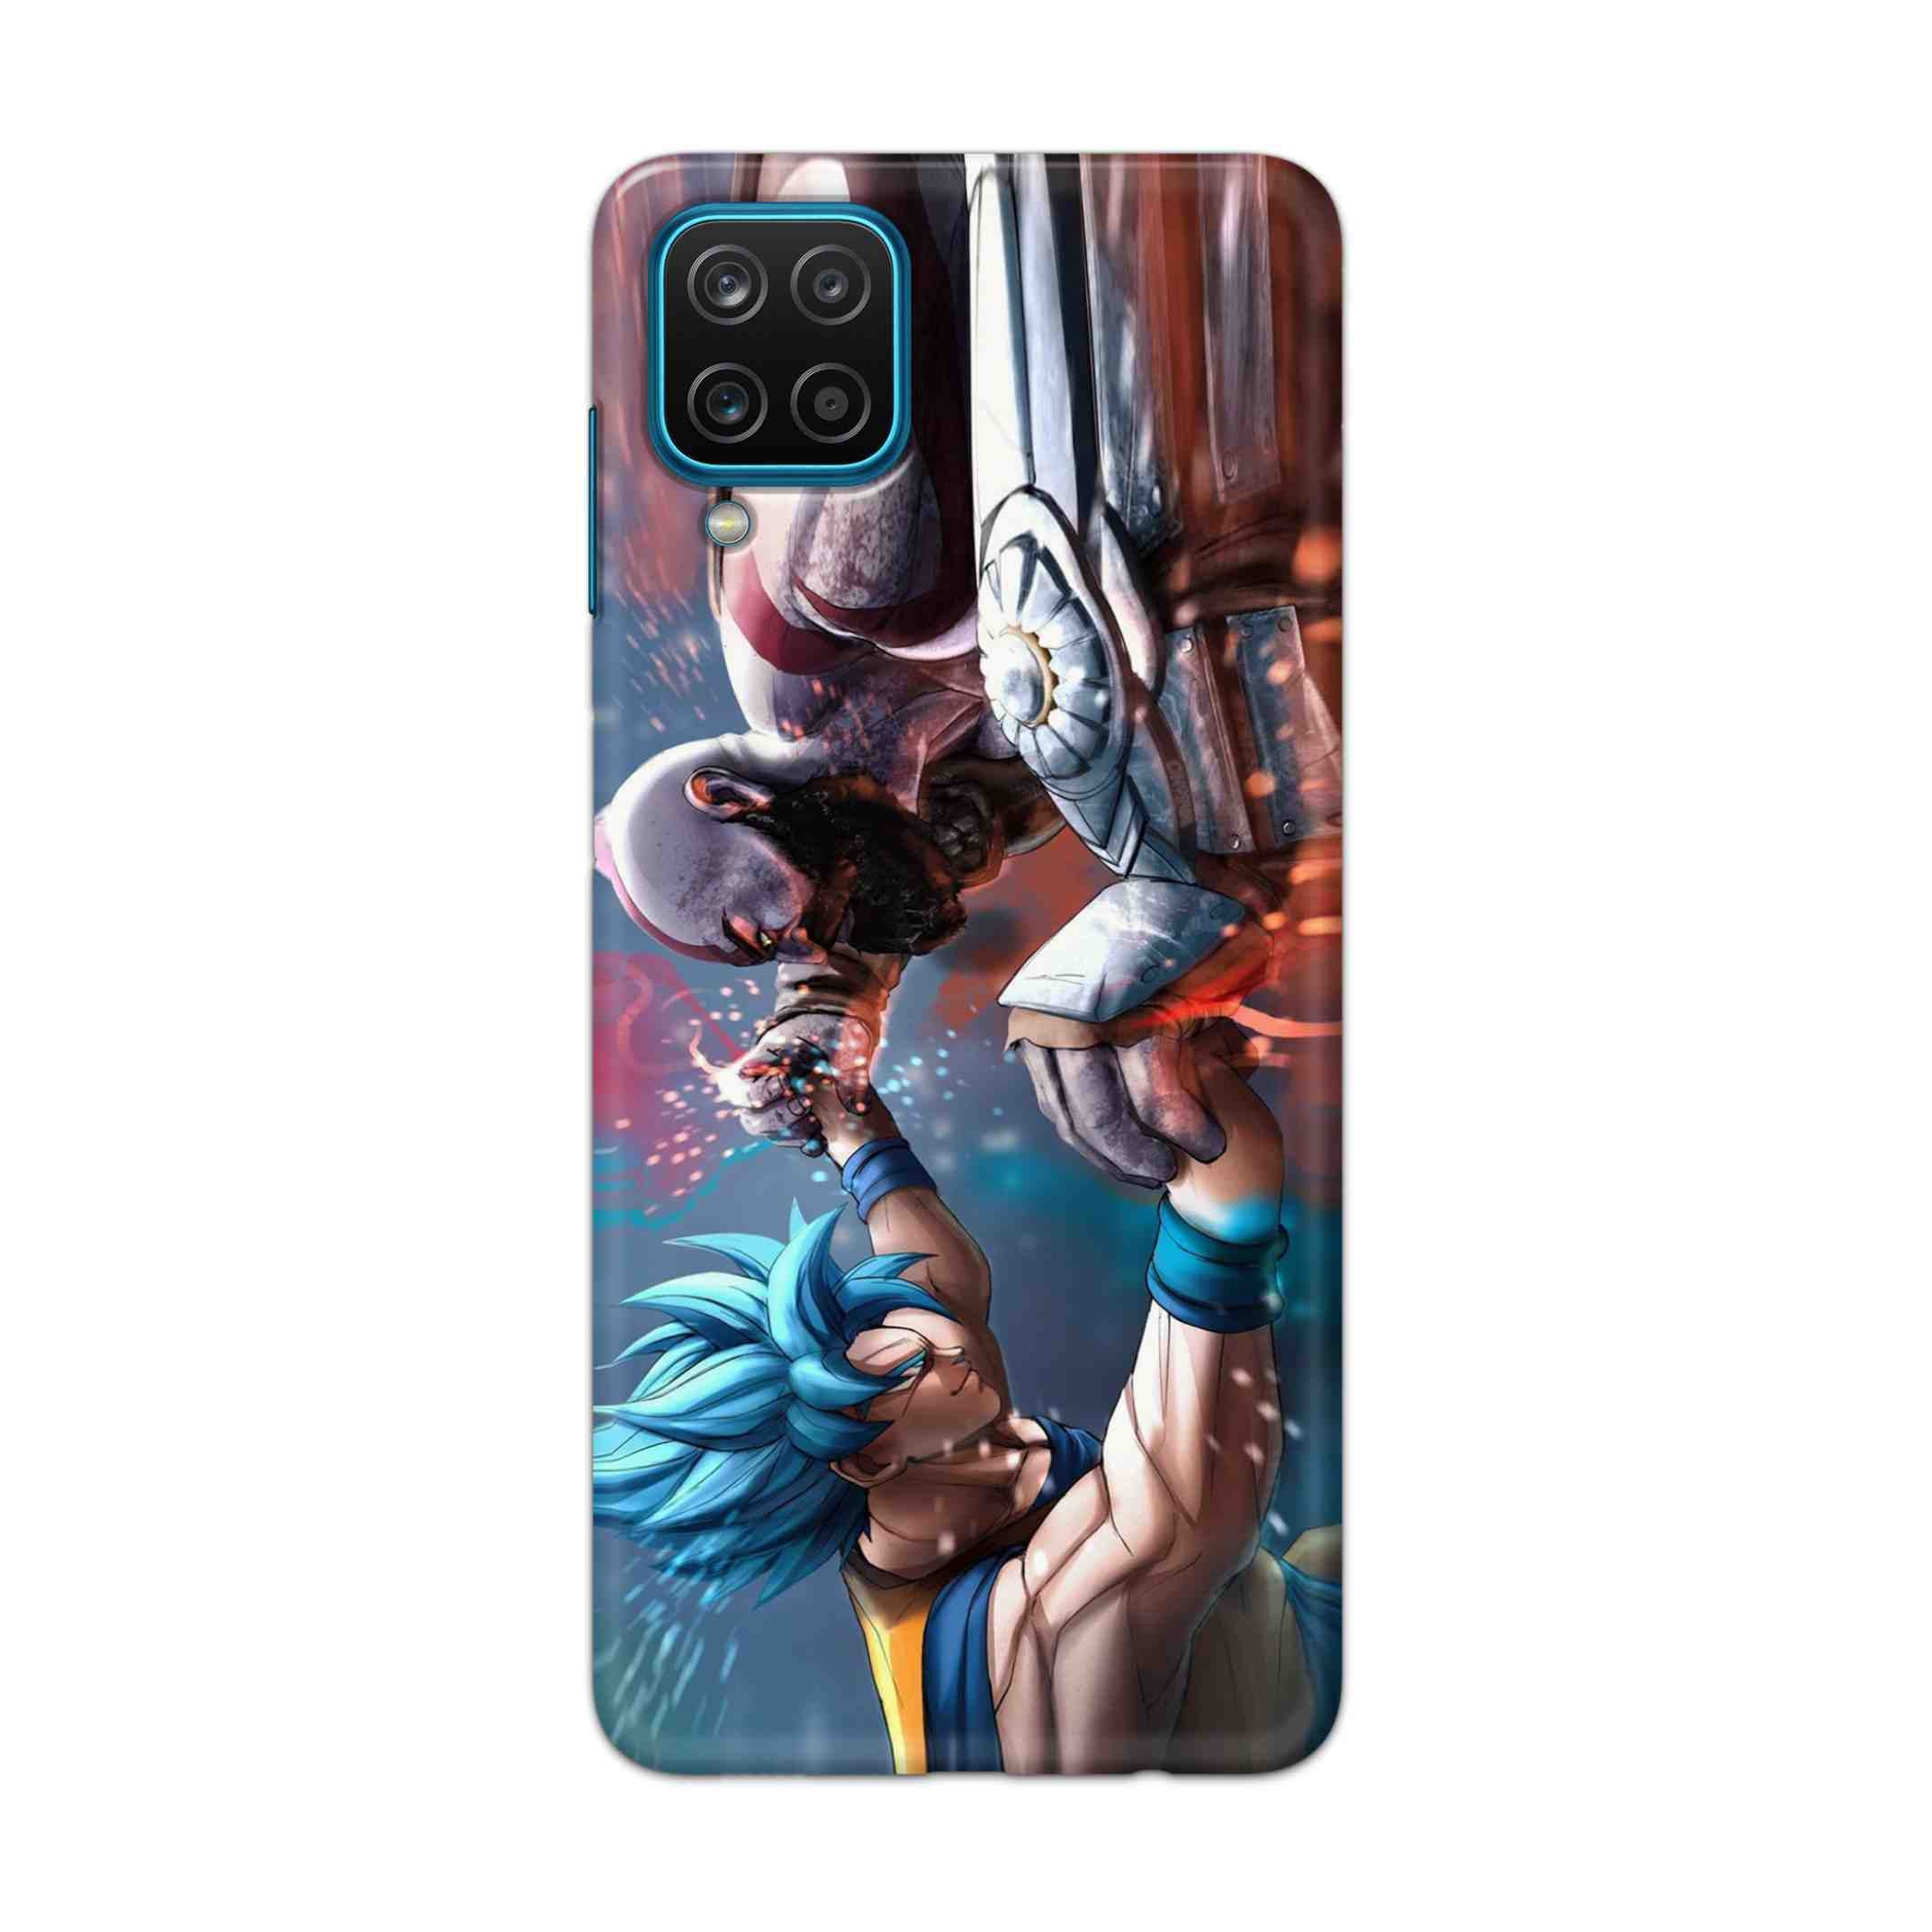 Buy Goku Vs Kratos Hard Back Mobile Phone Case Cover For Samsung Galaxy A12 Online